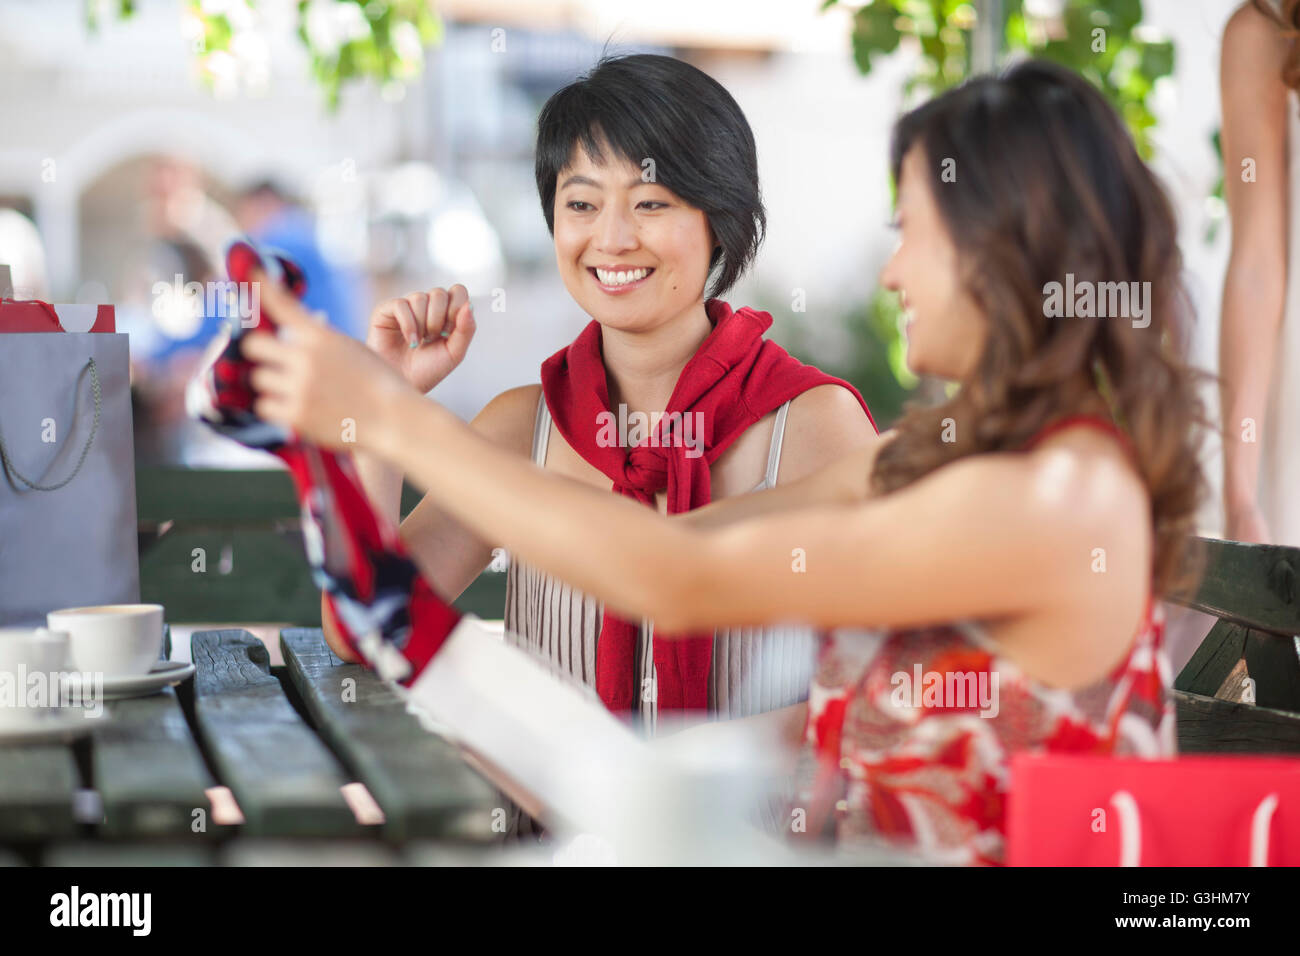 Woman showing friend new dress at city sidewalk cafe Stock Photo